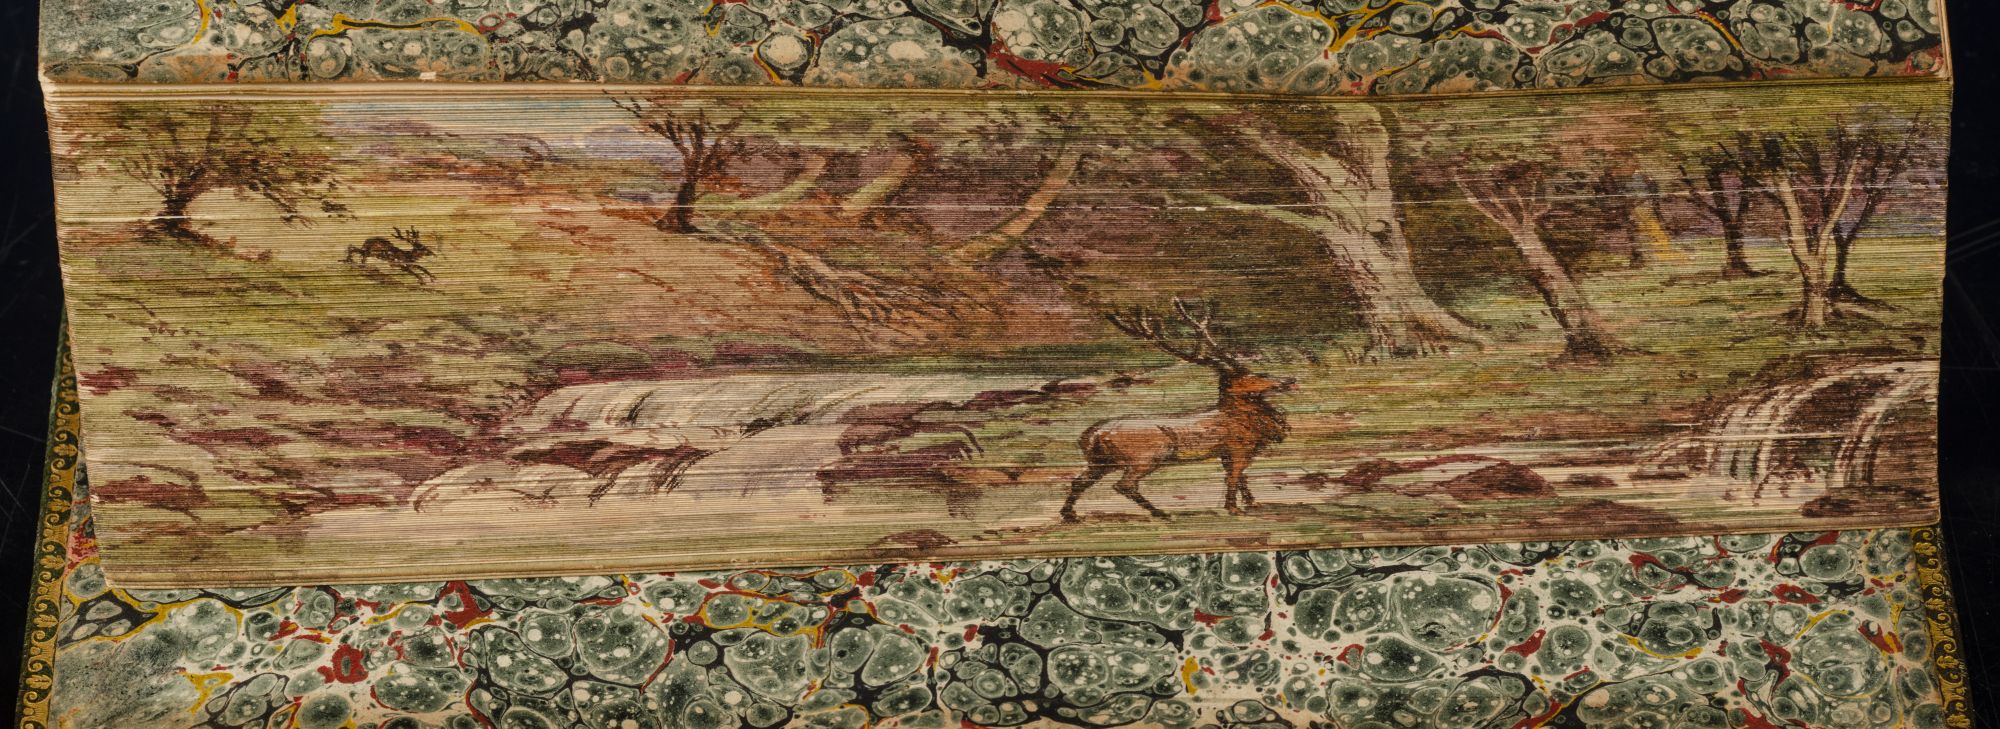 FORE-EDGE PAINTING; SCOTT, Sir Walter - Miscellaneous Poems